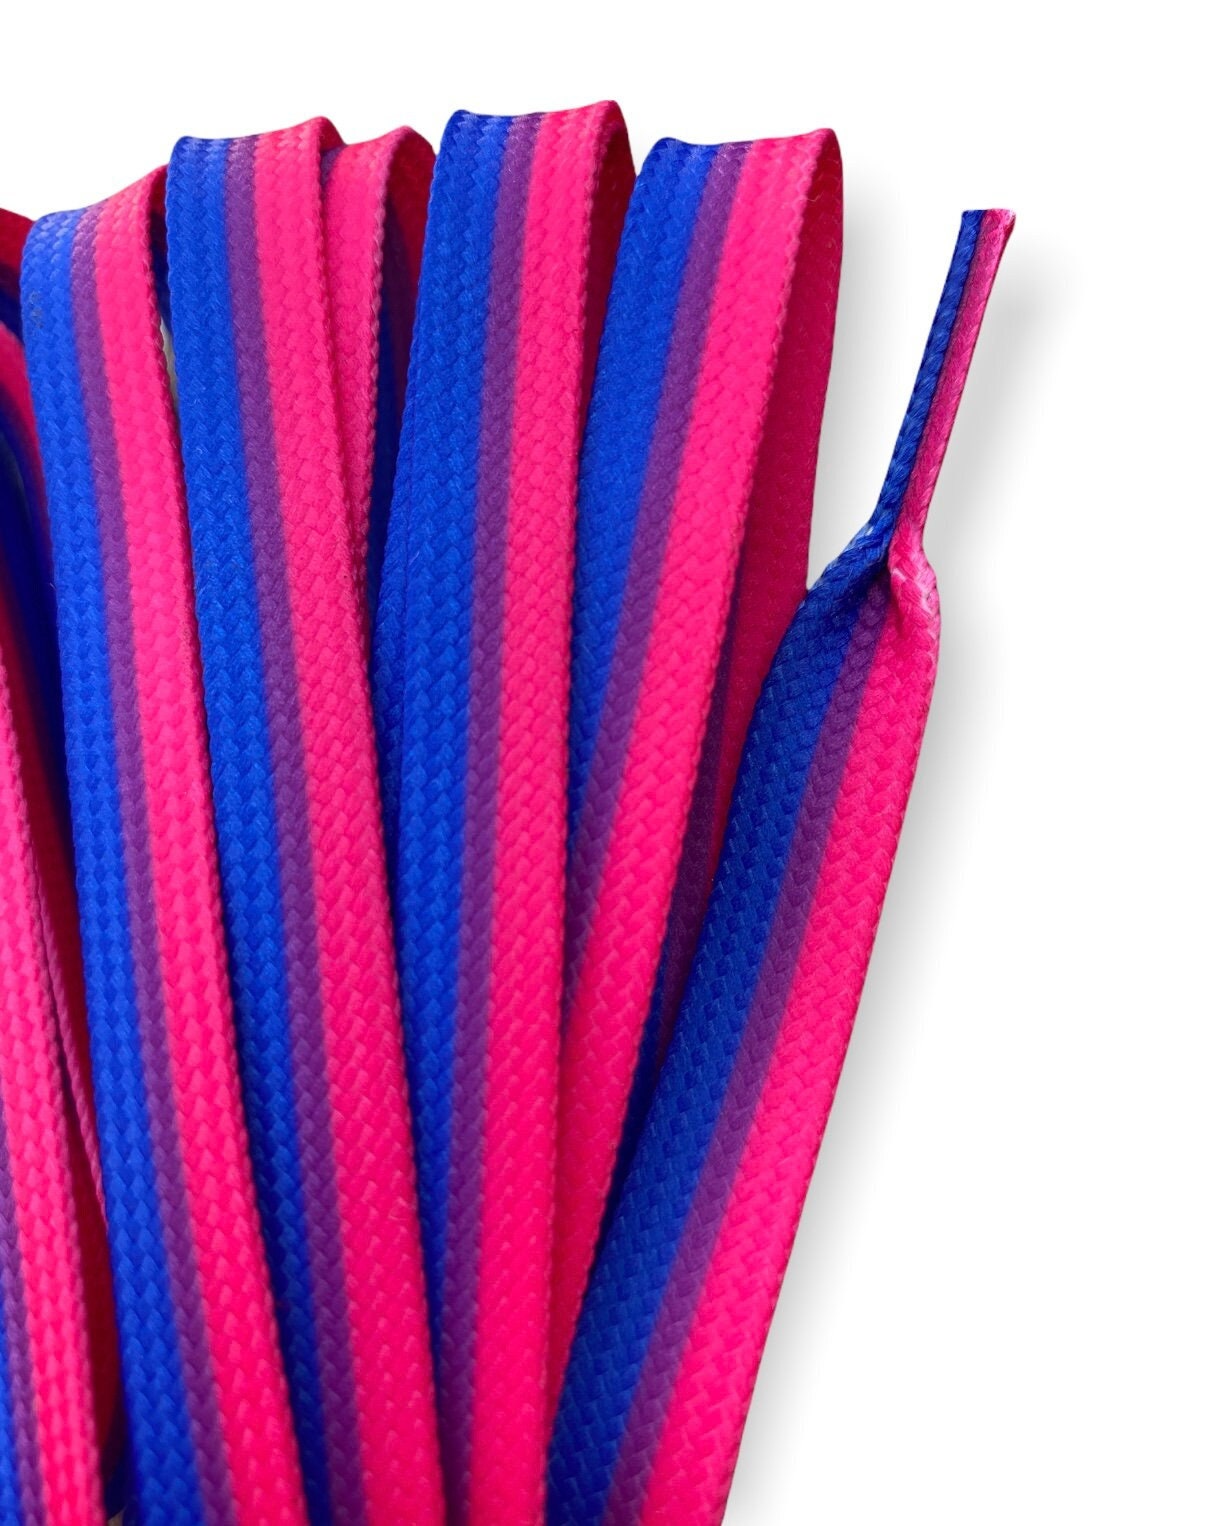 Bi Pride Stripe Laces – 96 inch STYLE Waxed Roller Skate Laces - pink, purple, and blue stripes